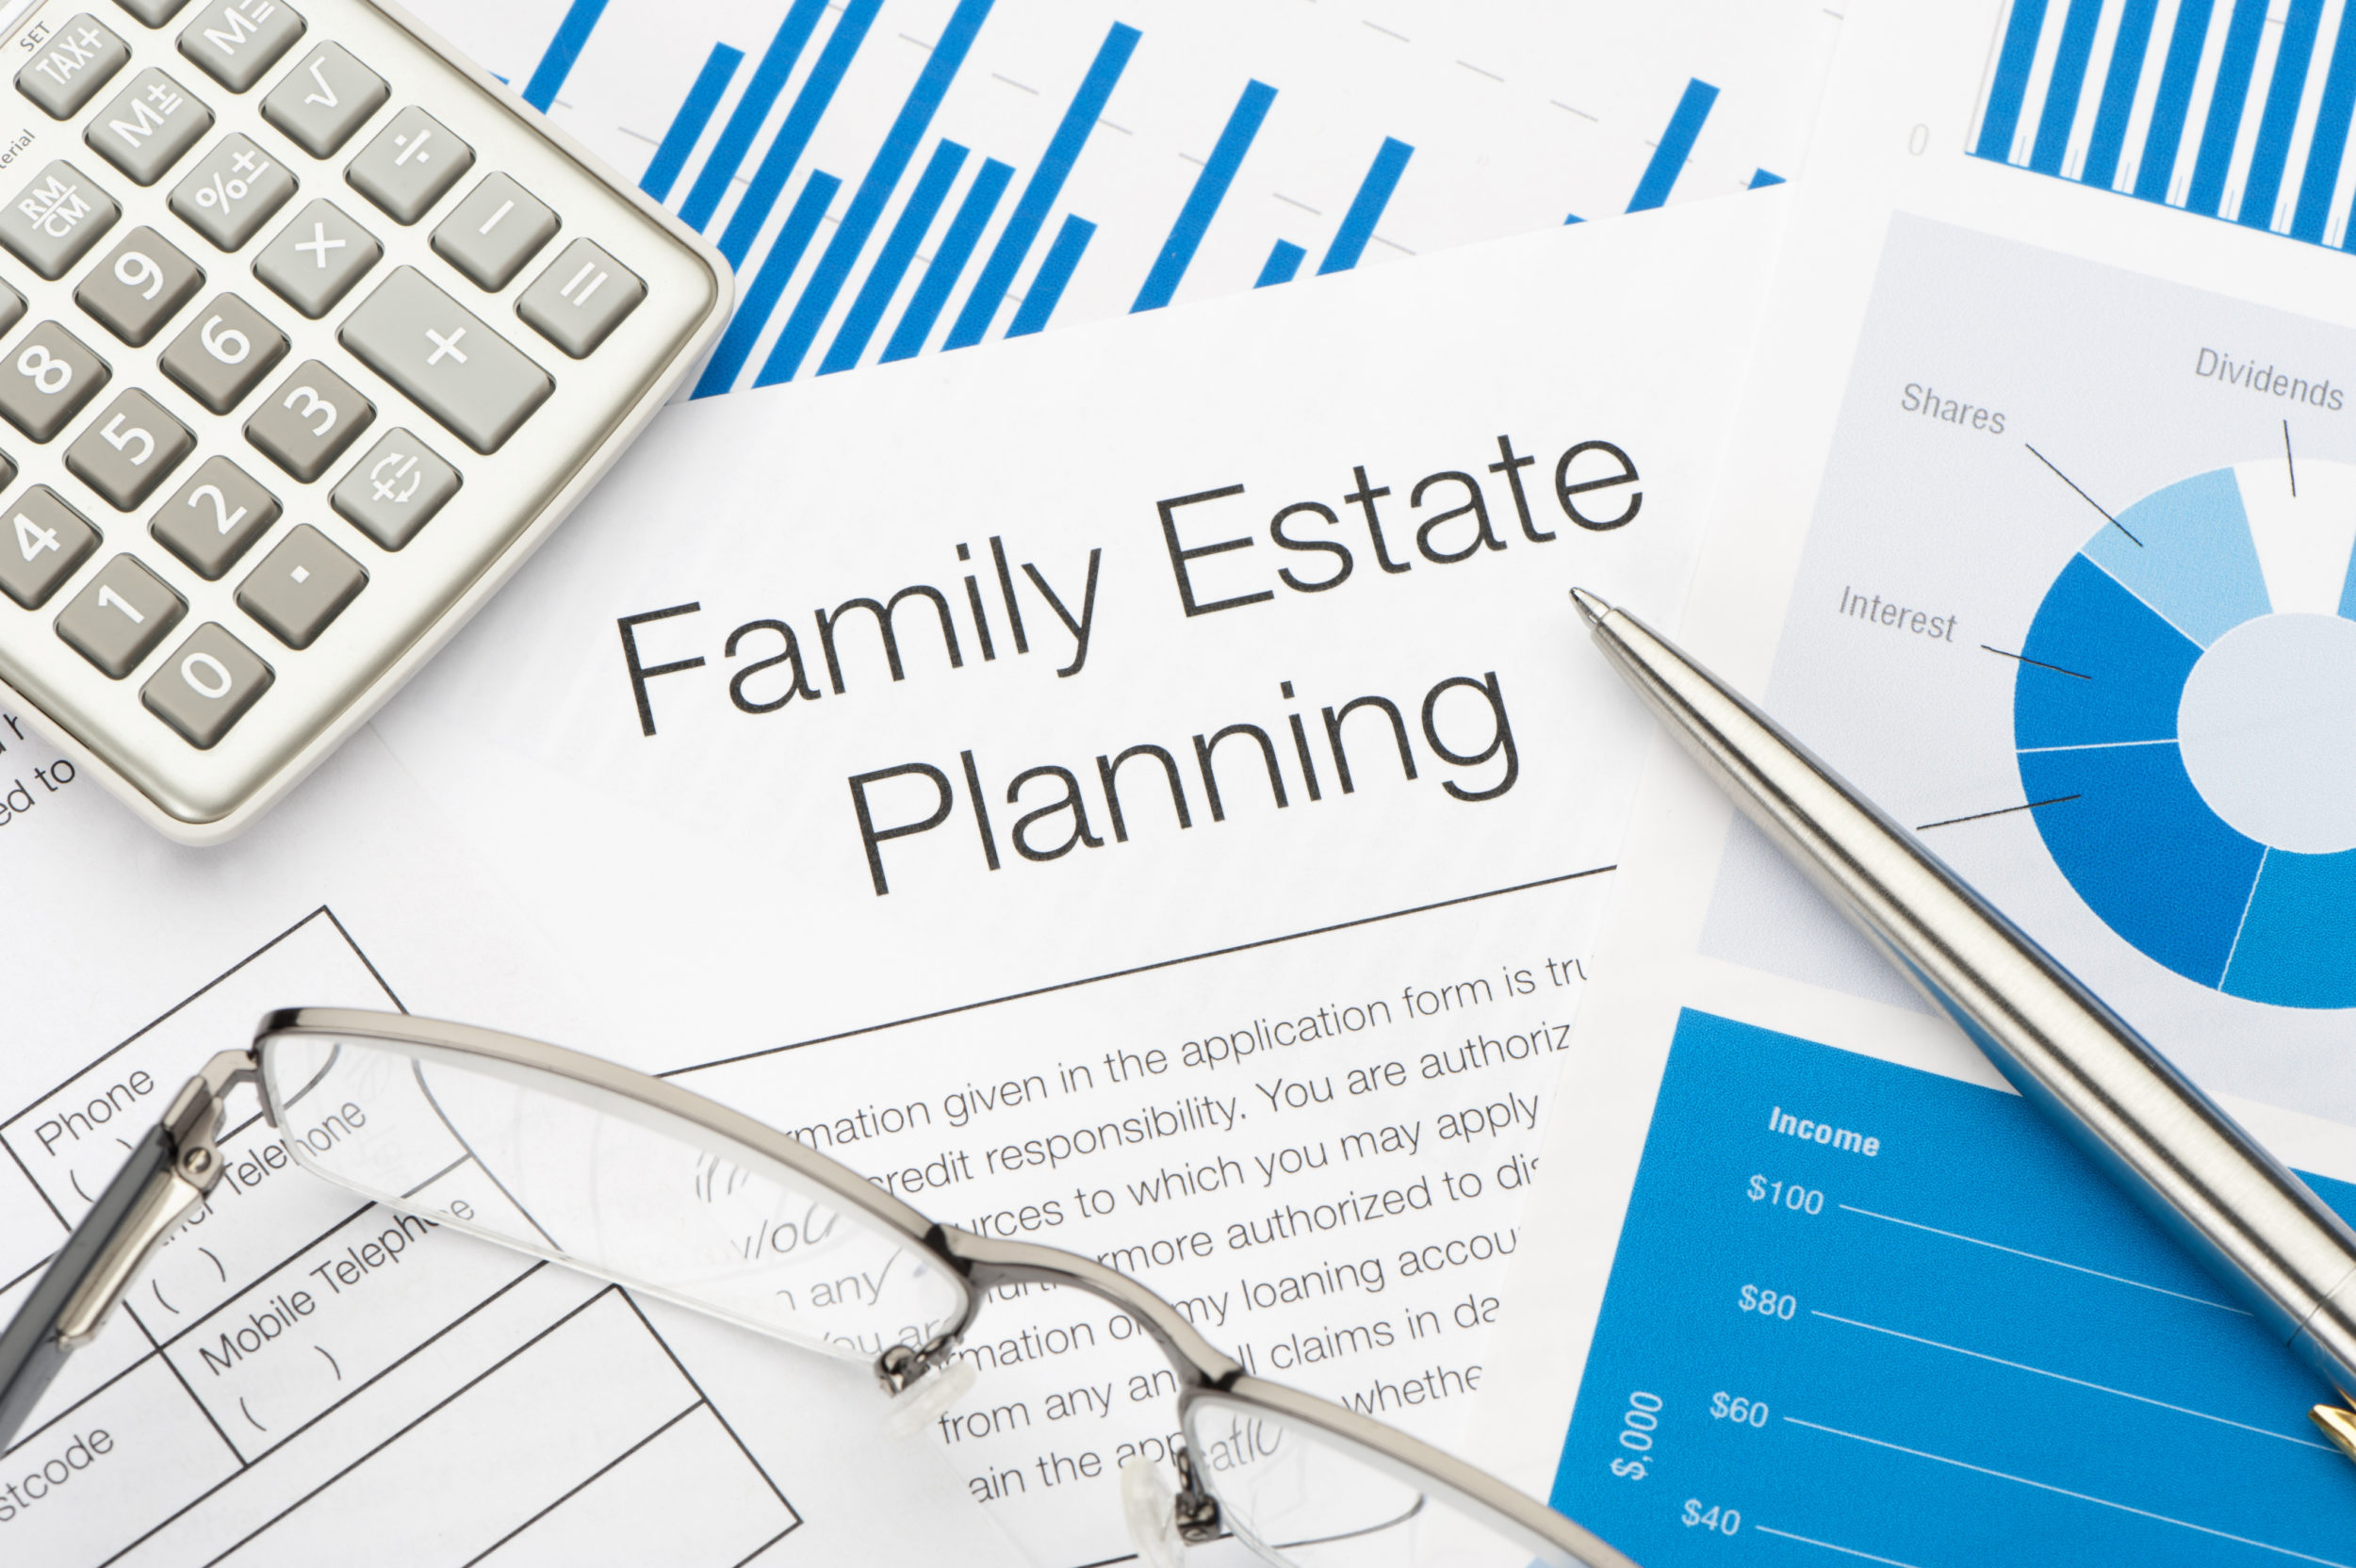 Documents showing Family Estate Planning, with calculator, silver pen and glasses